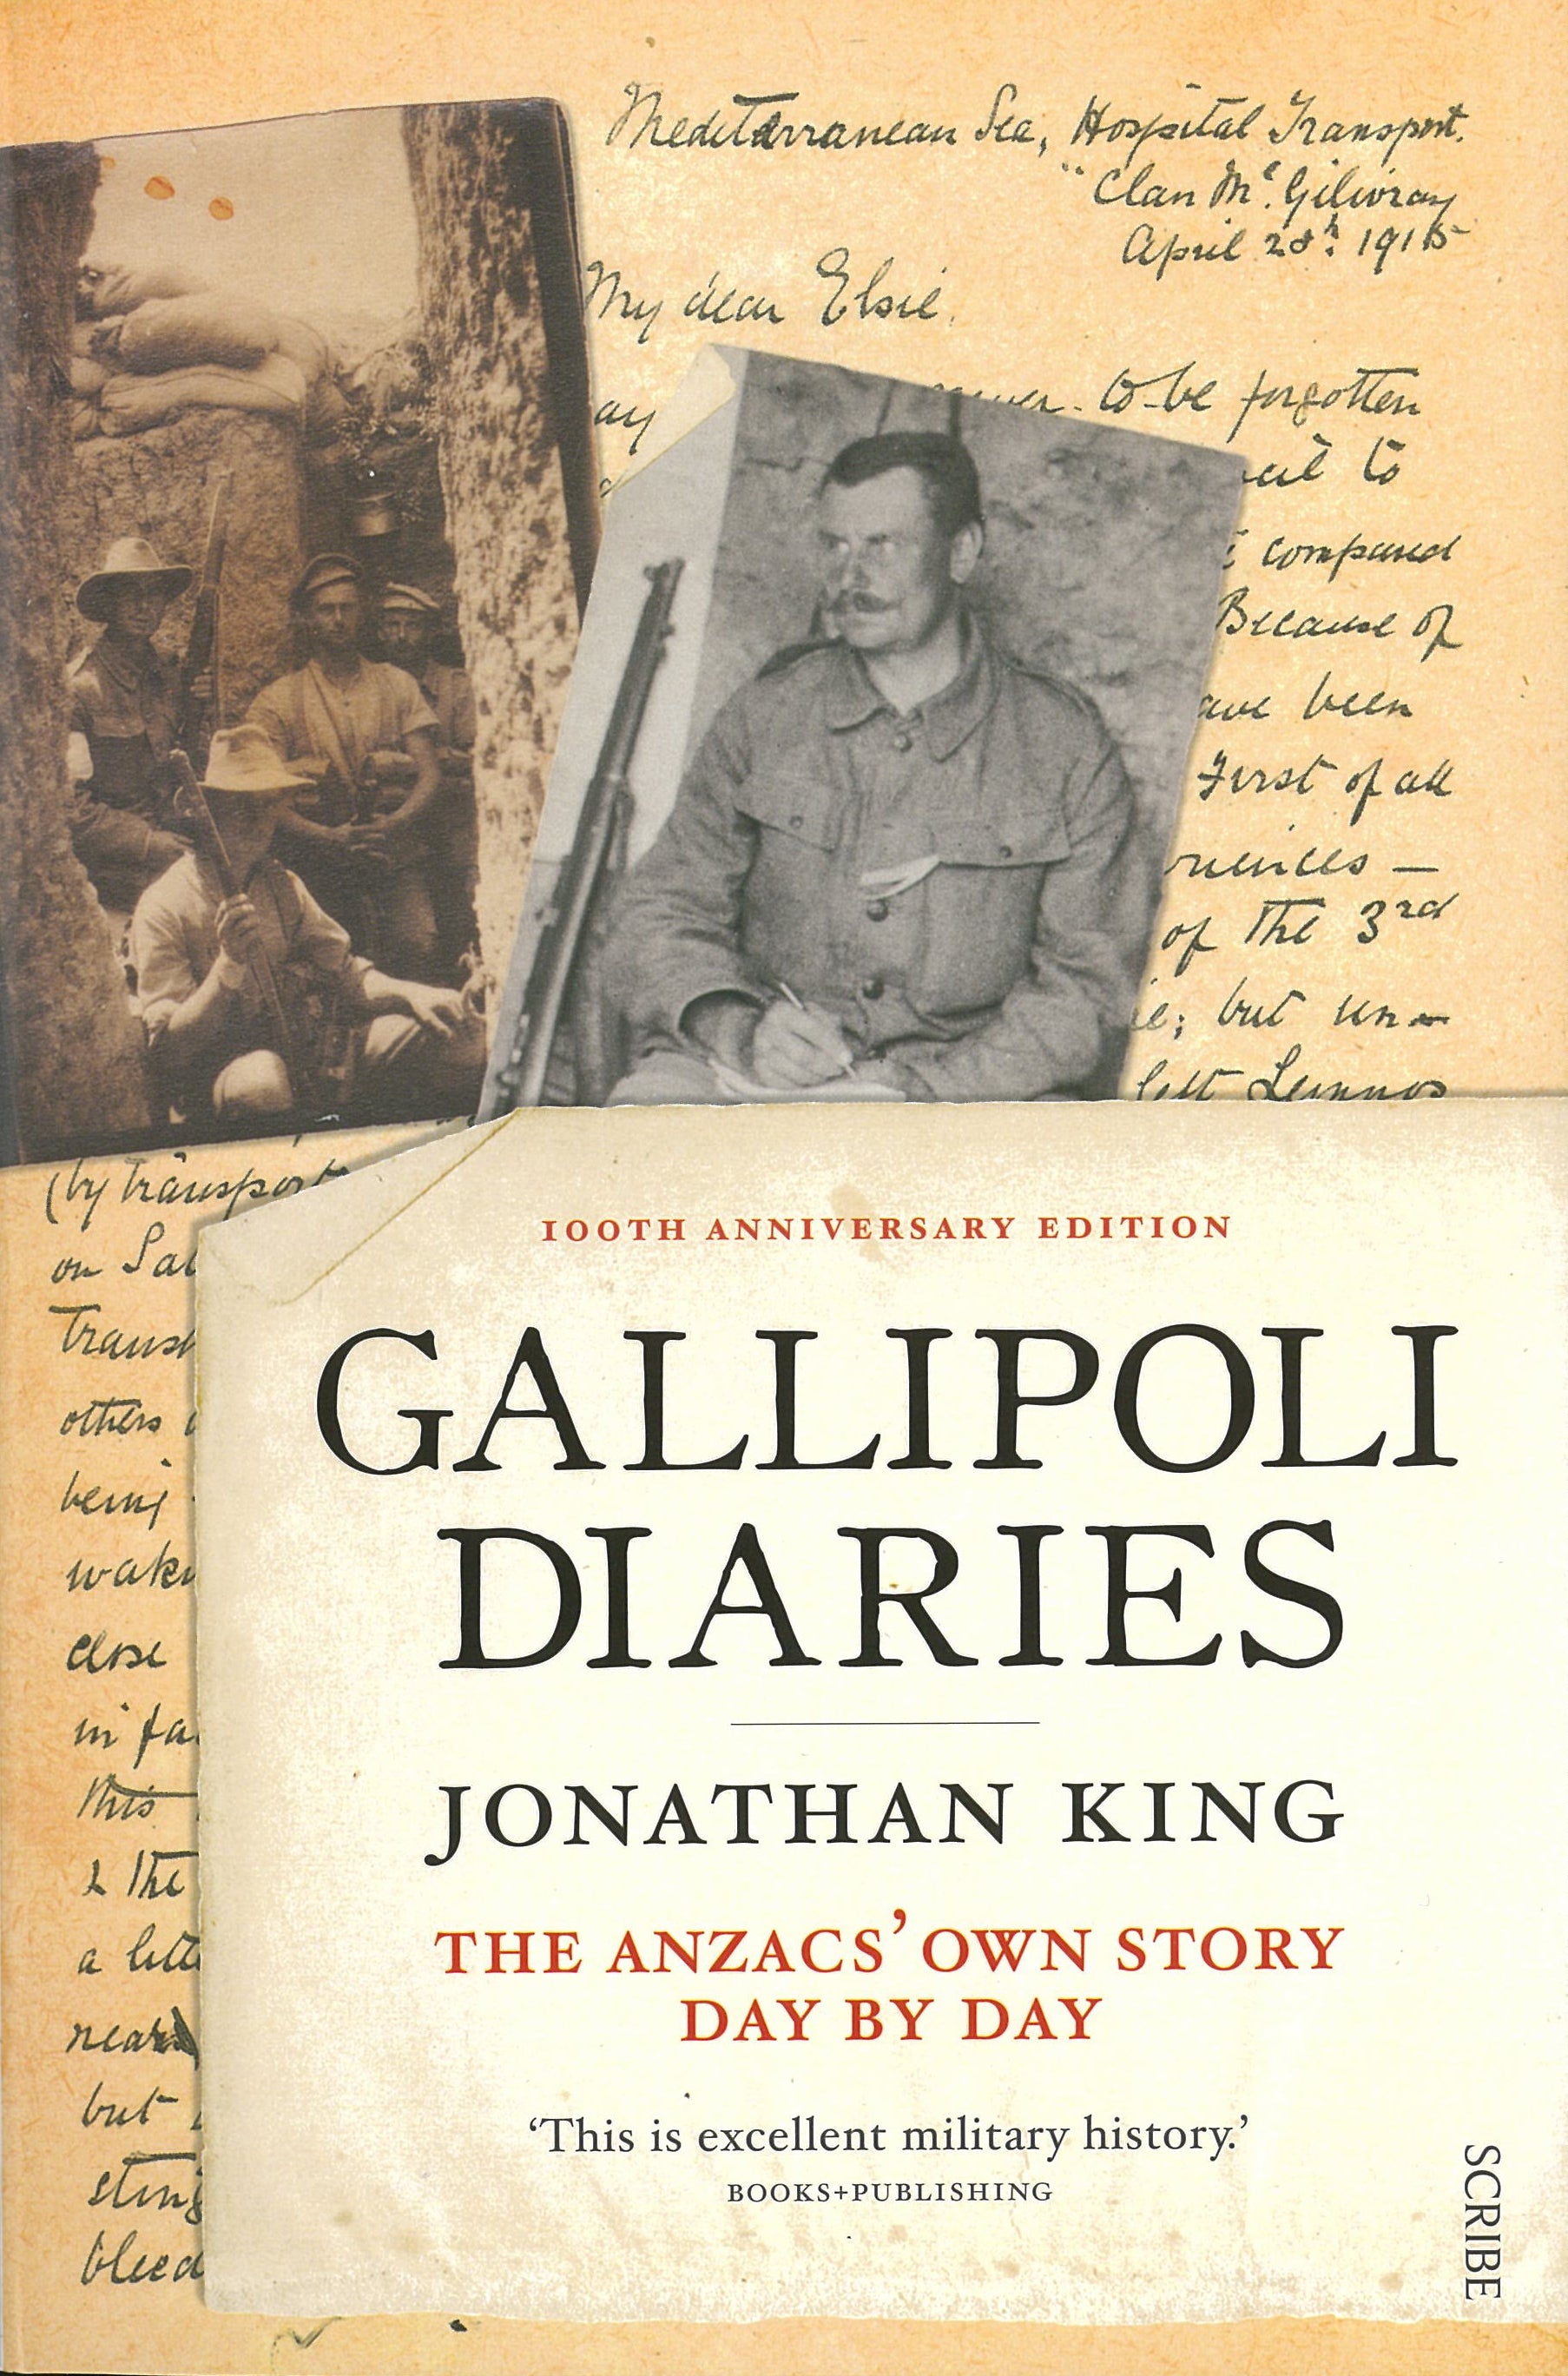 Gallipoli diaries: The ANZAC's own story day by day